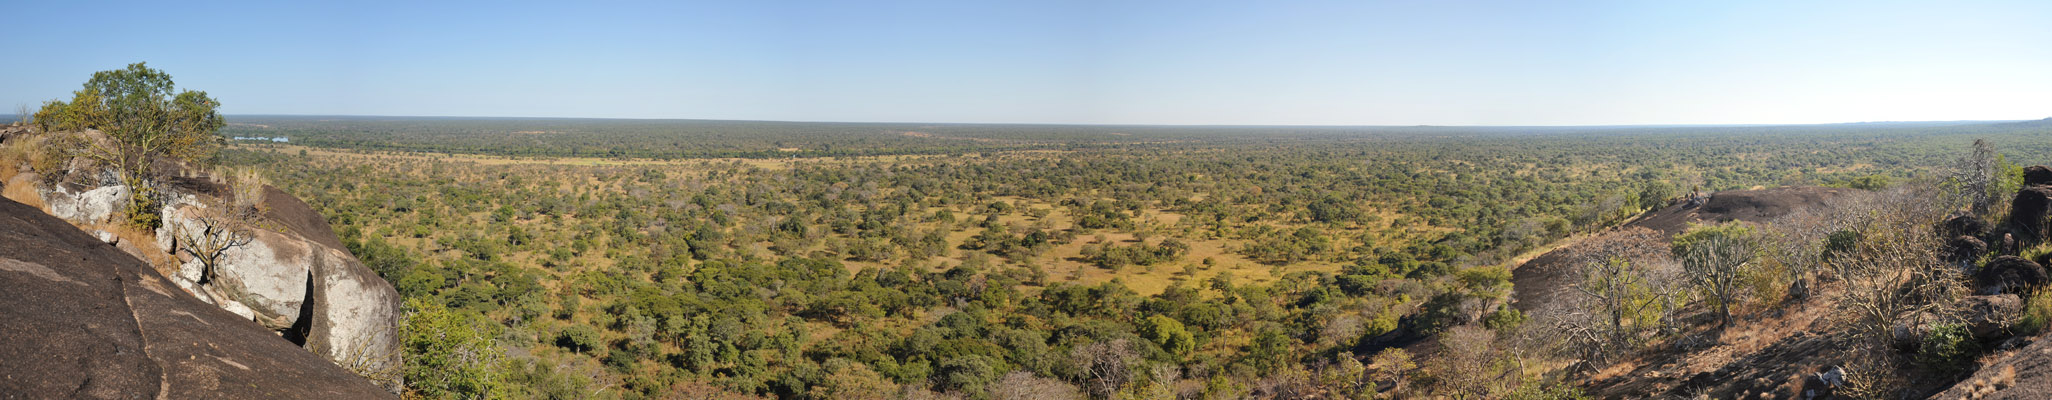 Panoramic view from the koppie above Puku Pan